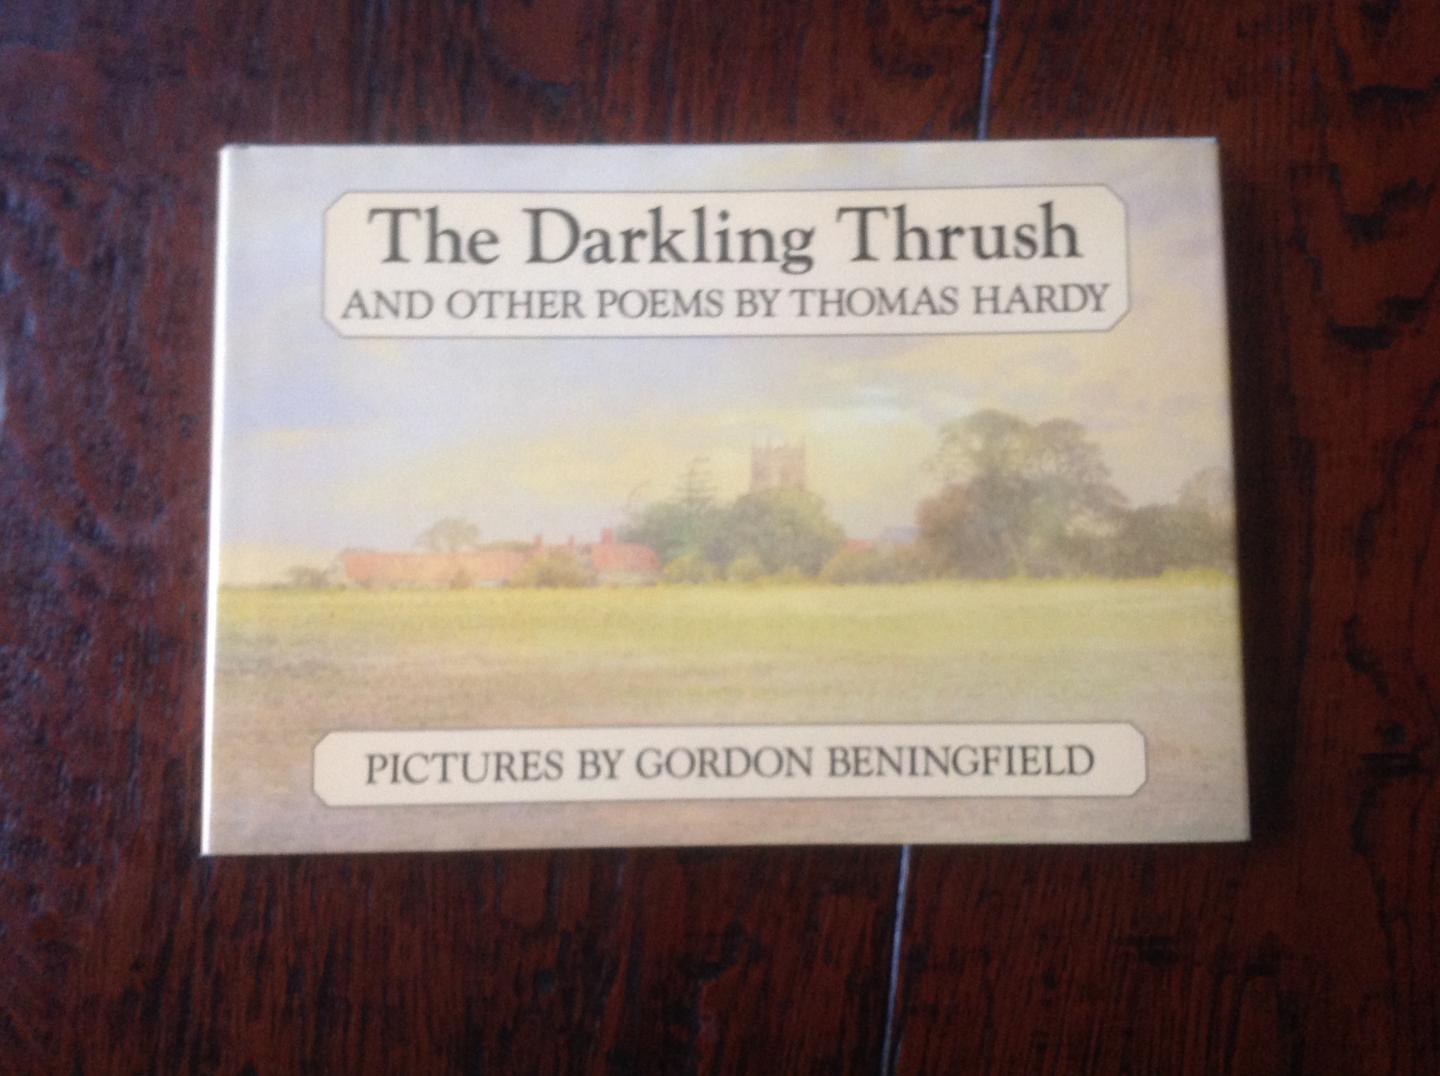 Hardey, Thomas - The Darkling Thrush and other poems by Thomas Hardy